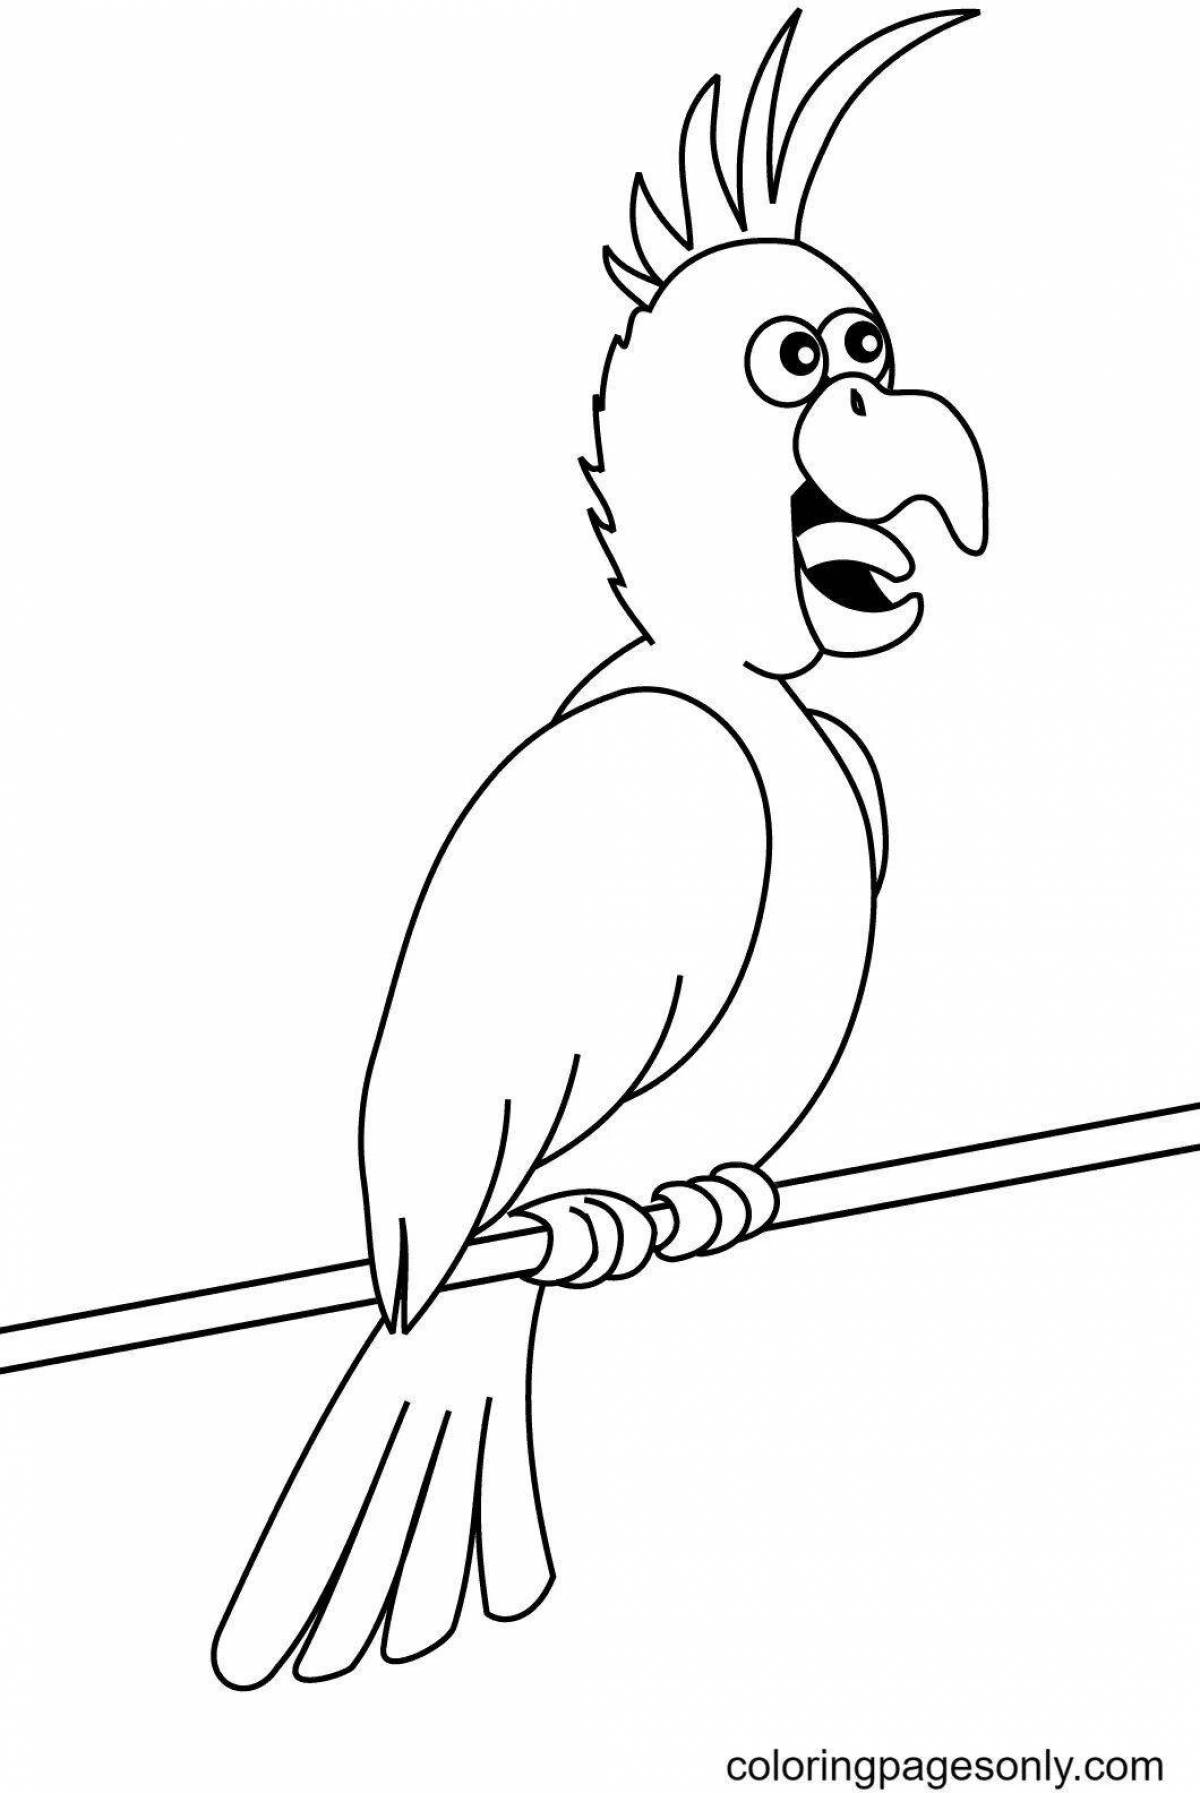 Showy parrot coloring book for kids